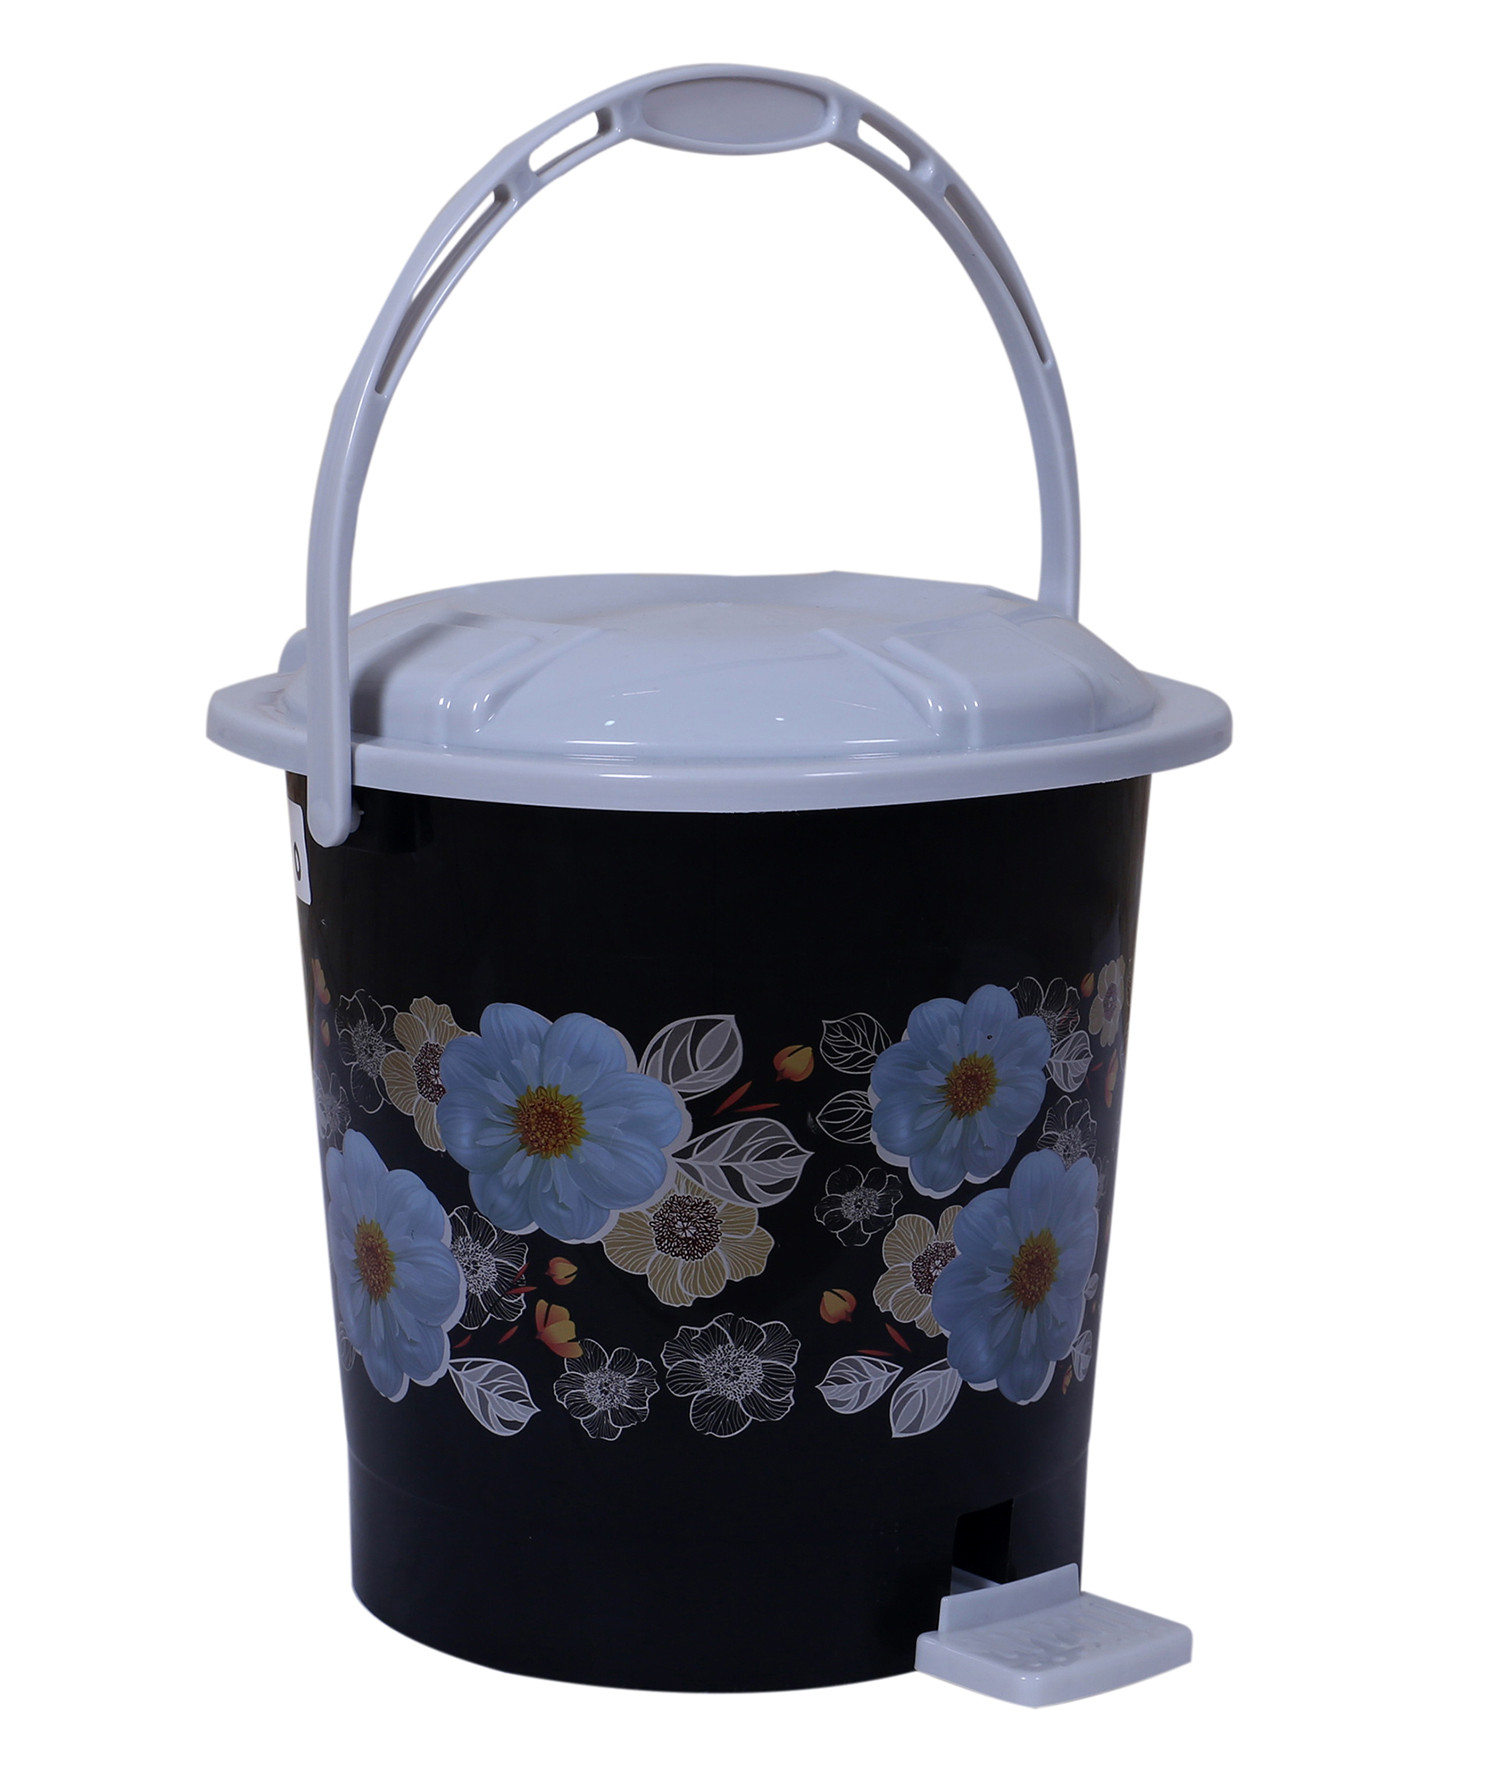 Kuber Industries Durable Flower Print Plastic Pedal Dustbin|Waste Bin|Trash Can For Kitchen & Home With Handle,7 Litre (Black)